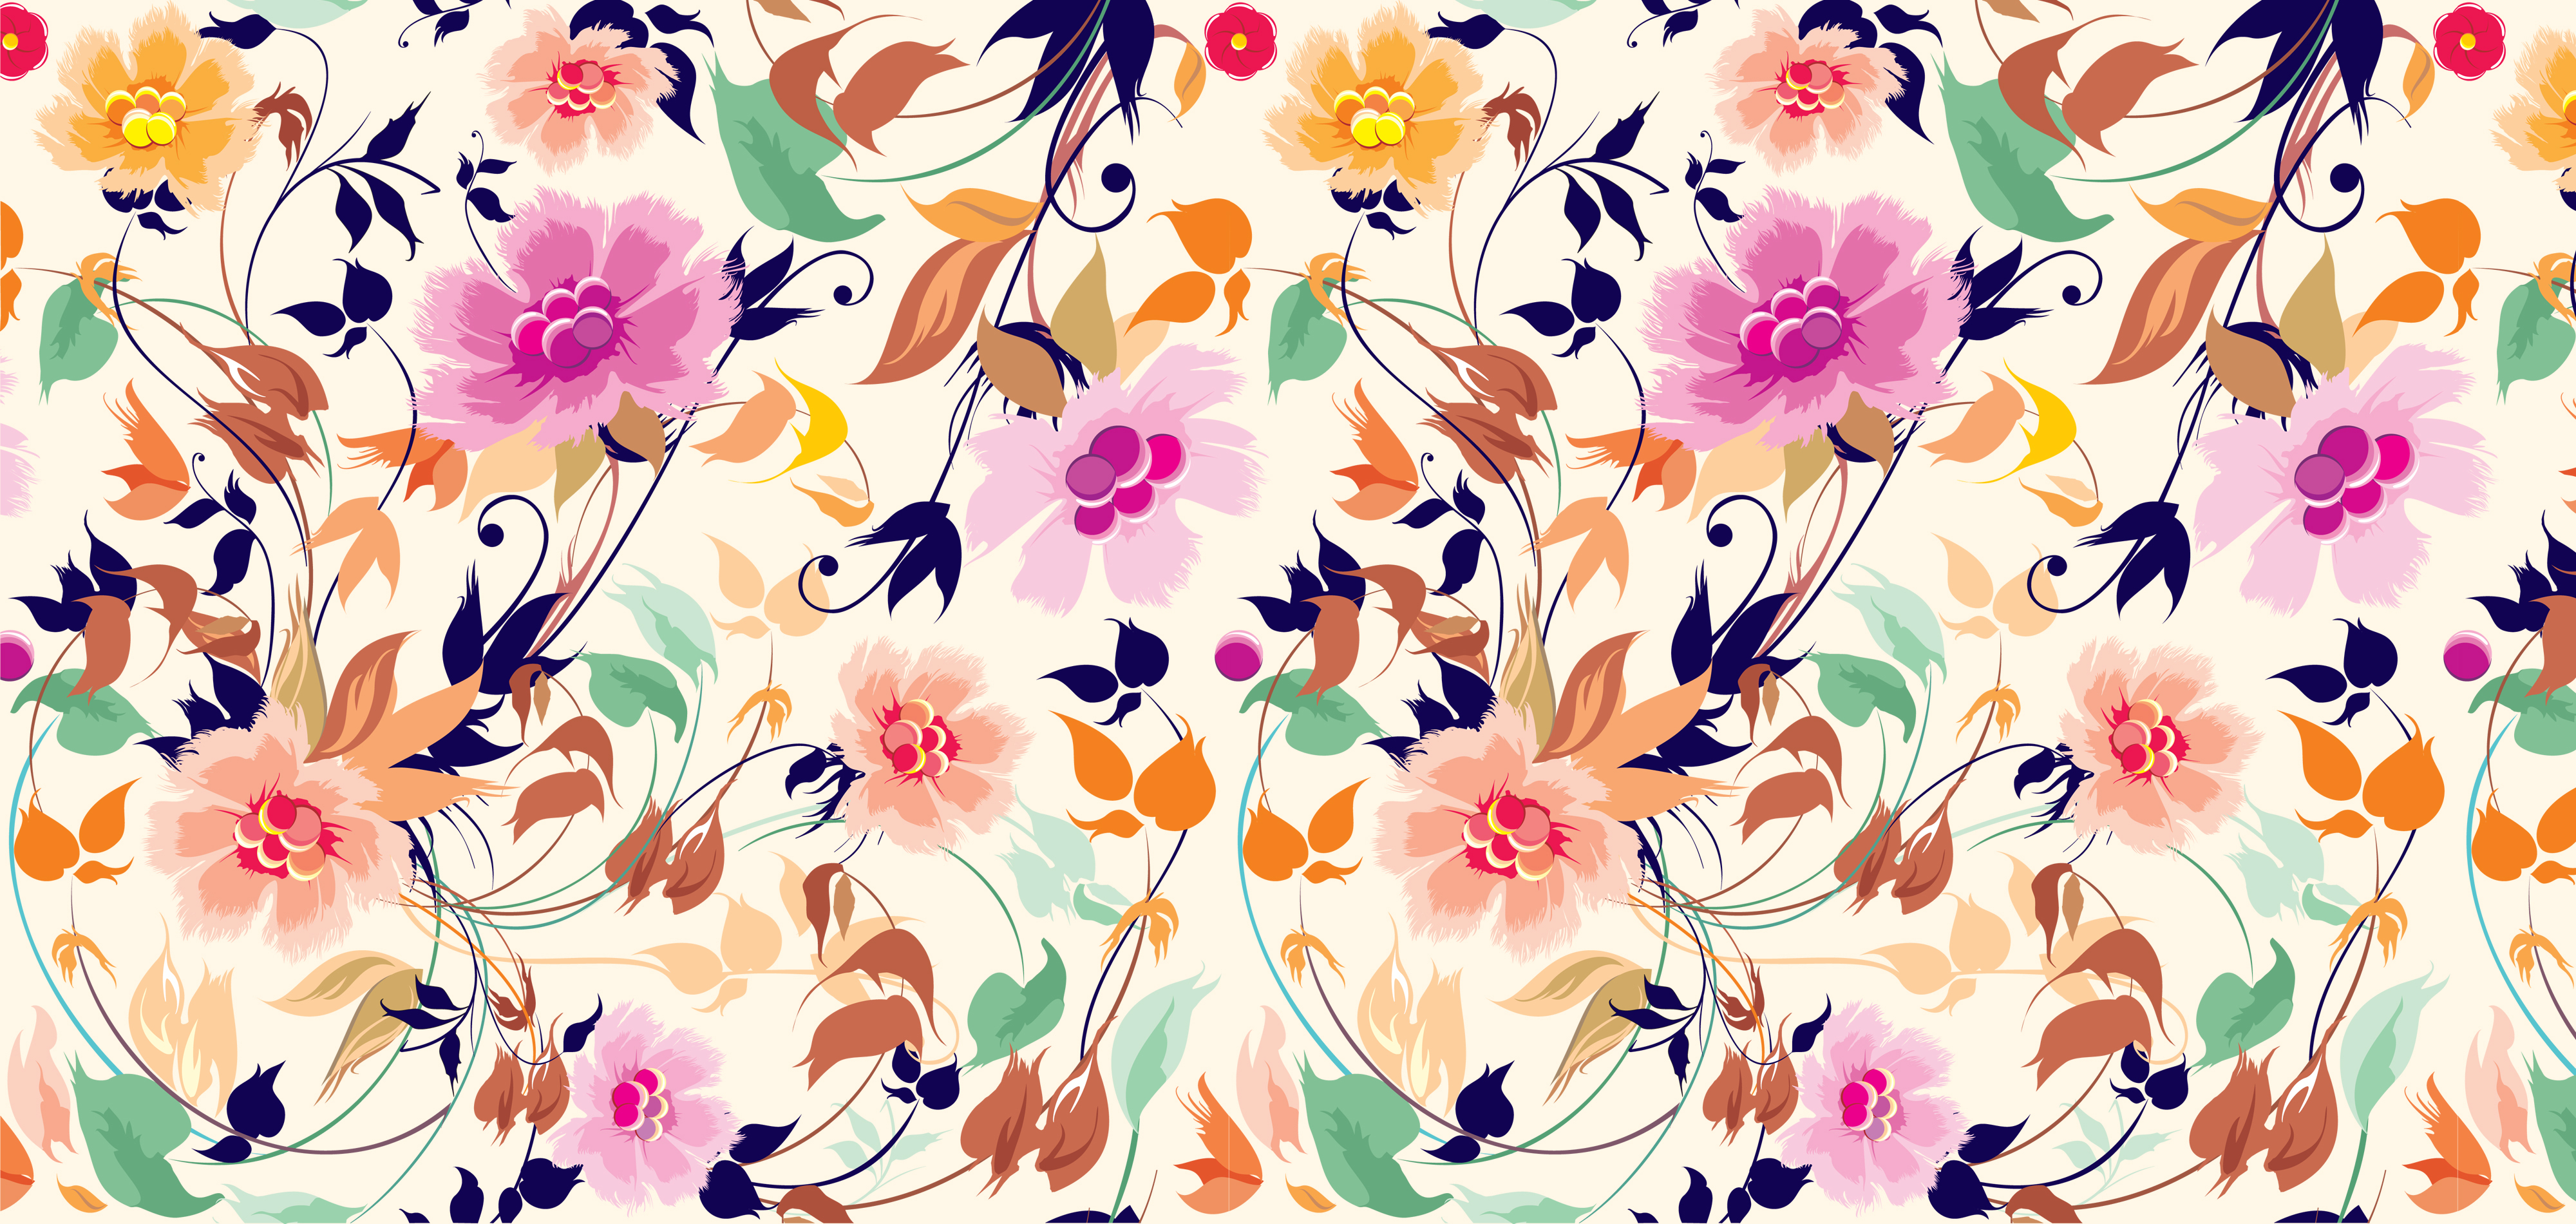 Cool Backgrounds  Flowers